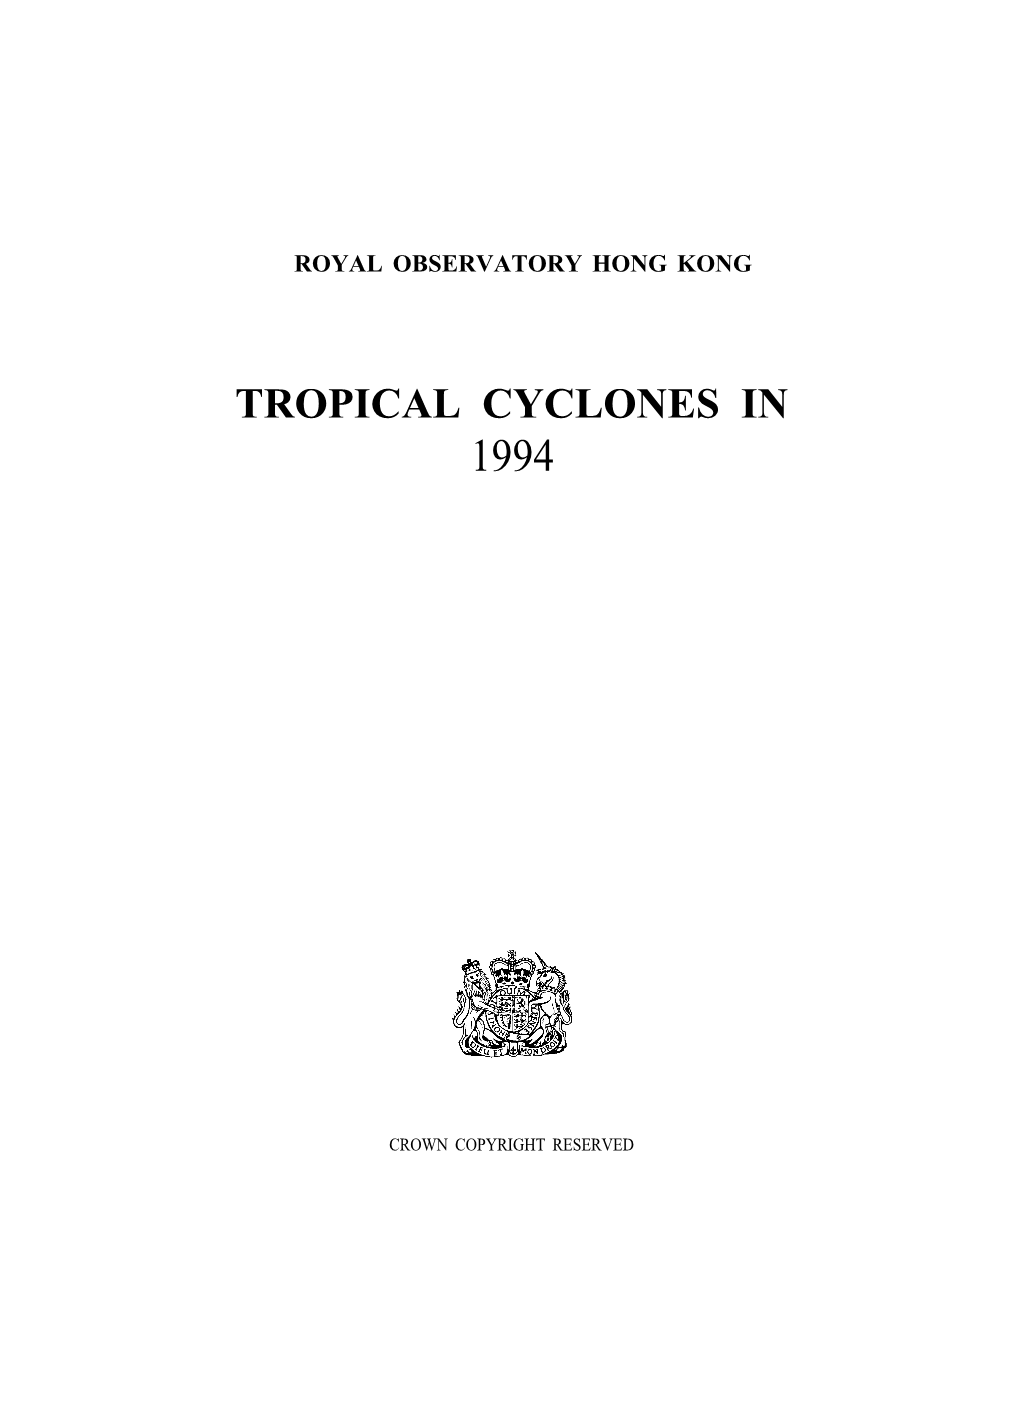 Tropical Cyclones in 1994